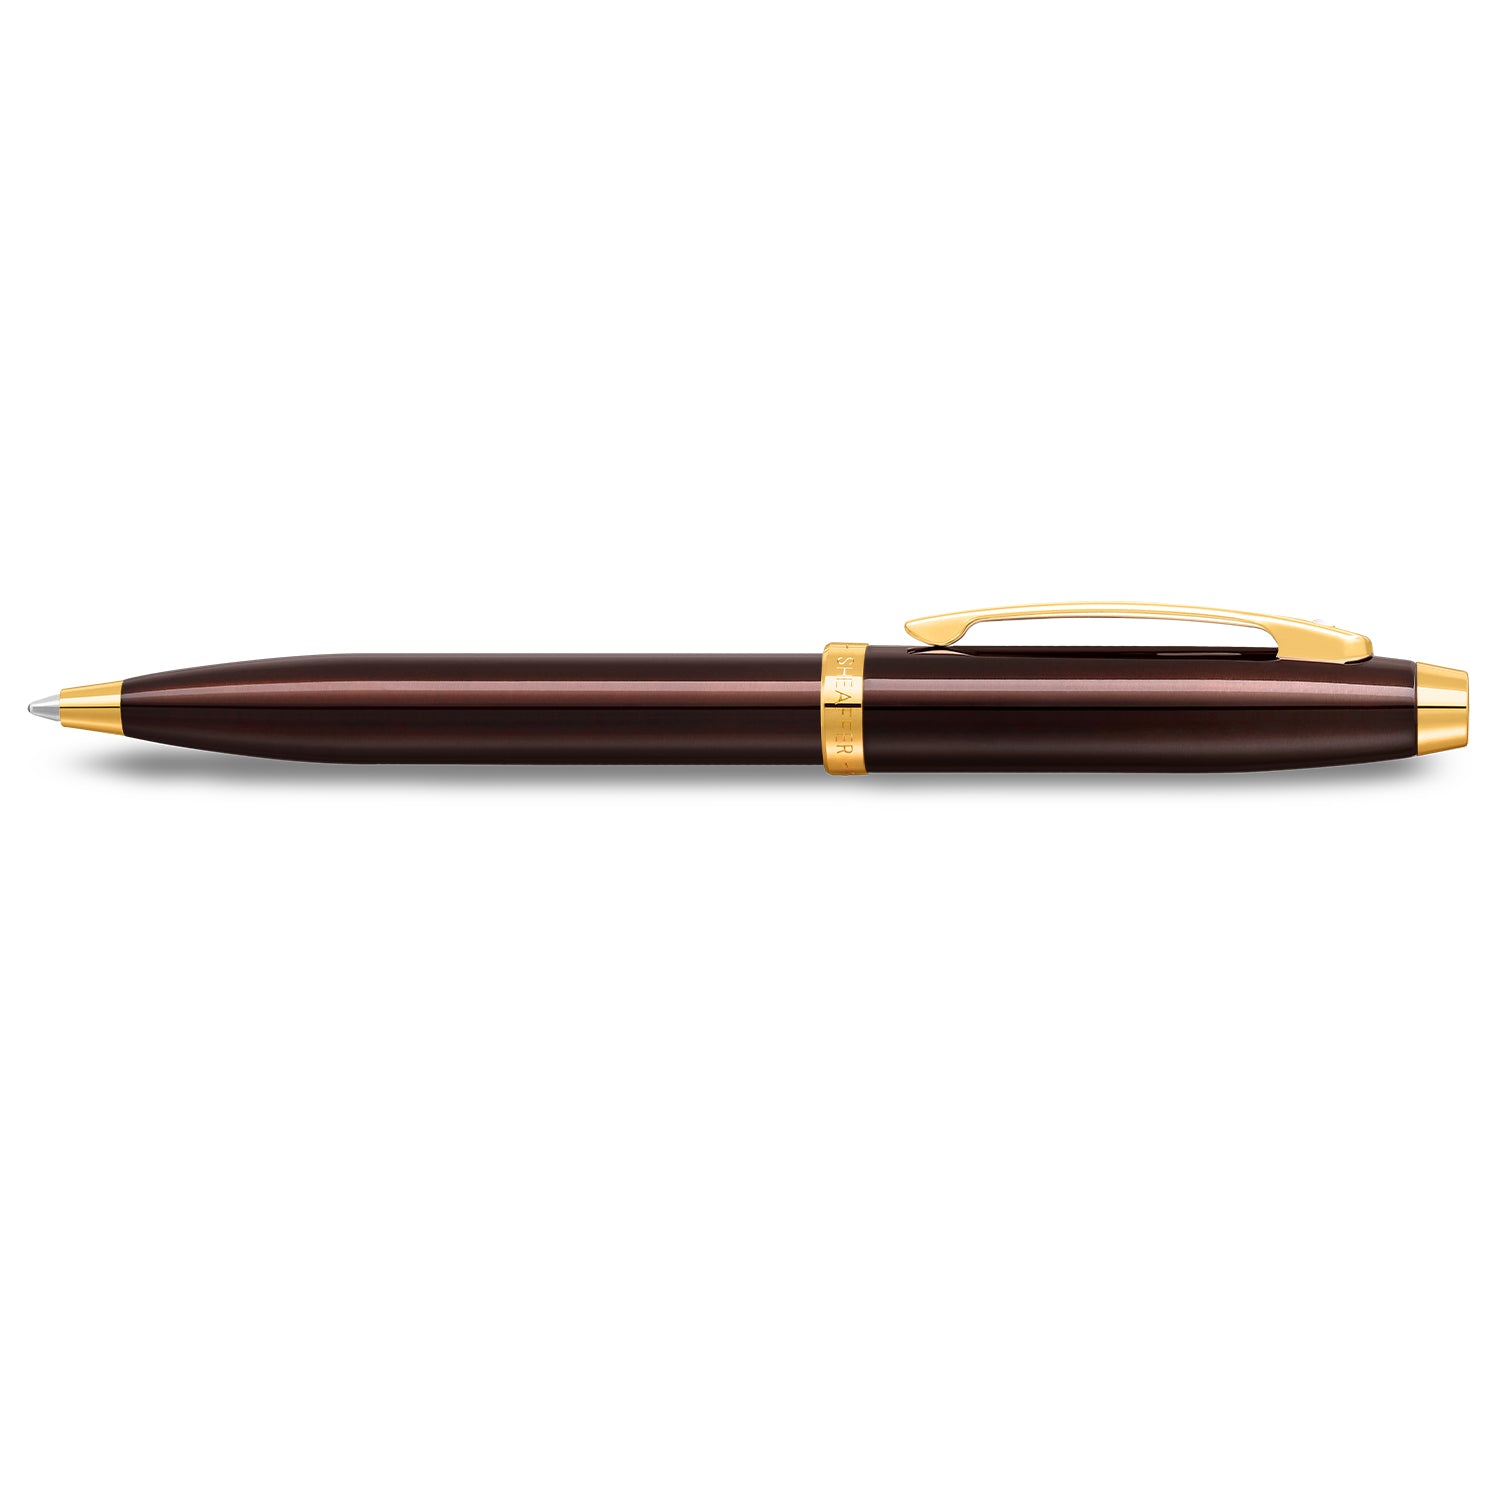 The Sheaffer® 100 9370 Glossy Coffee Brown Ballpoint Pen With PVD Gold-Tone Trim is a pen with gold trim that guarantees a writing experience like no other. It could be a perfect gift for those who appreciate the art of writing.